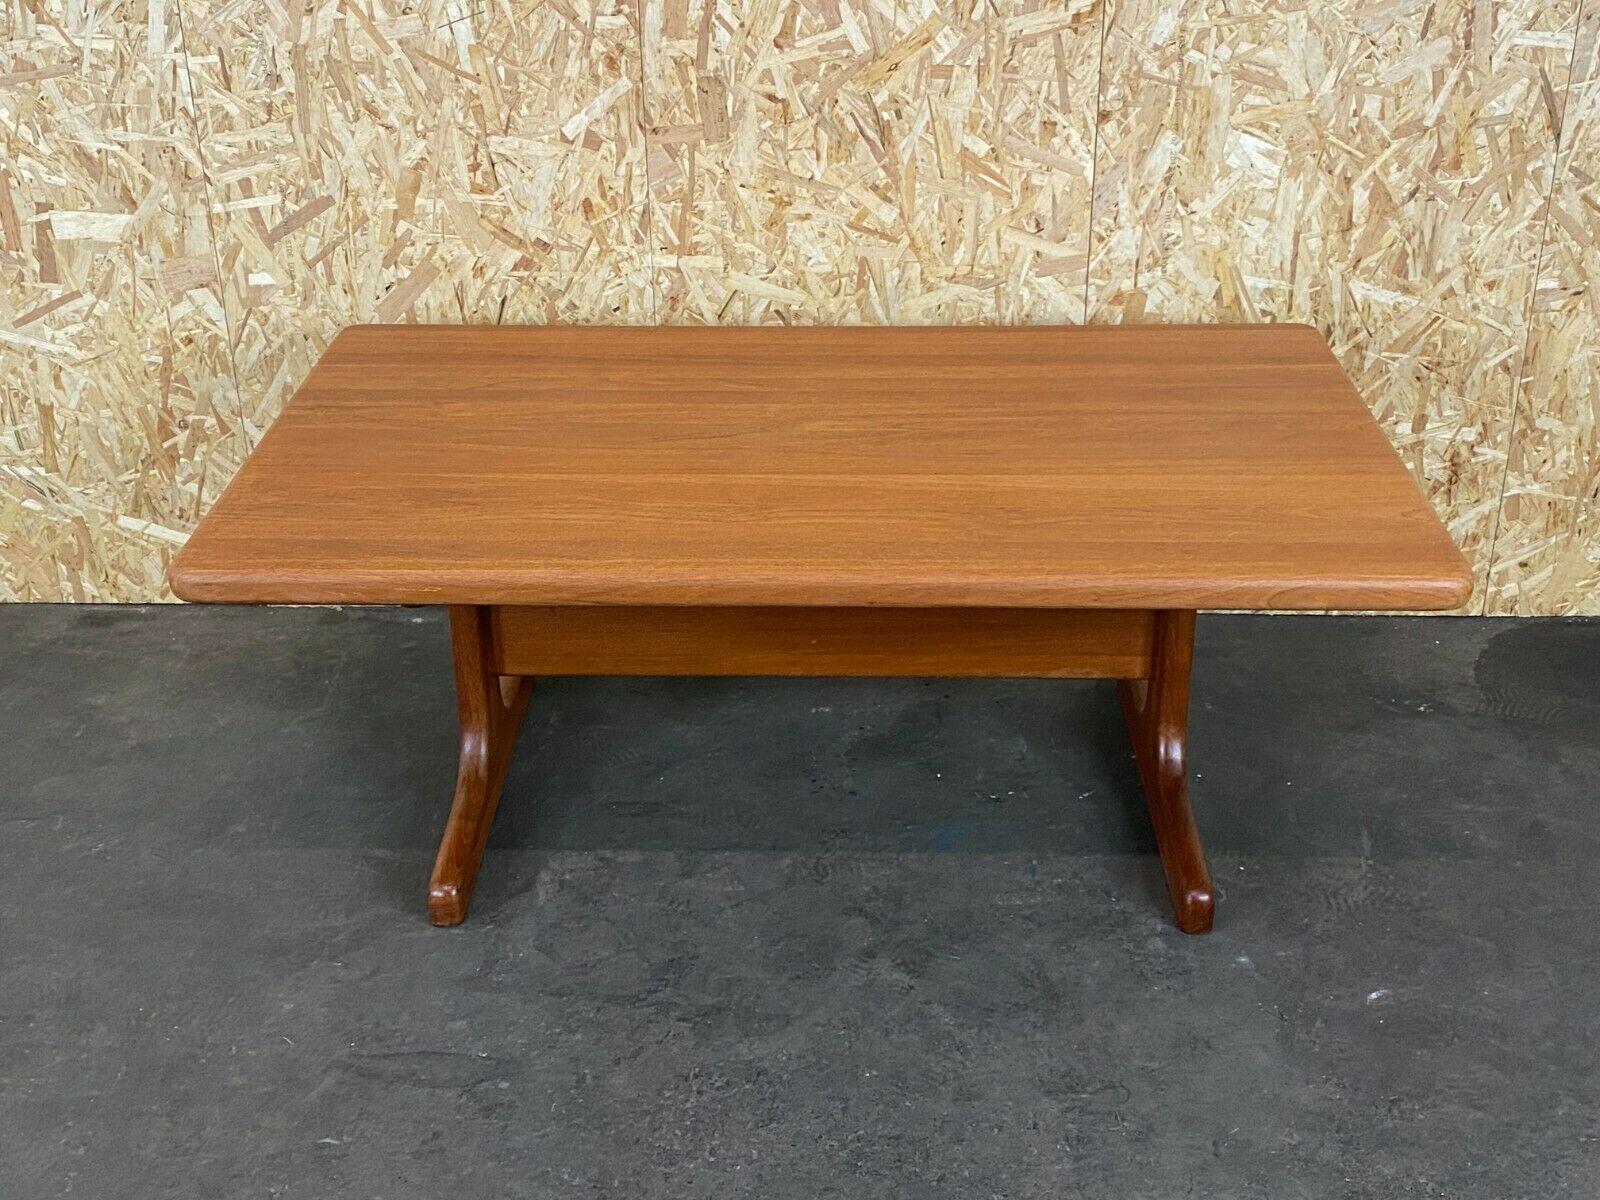 60s 70s teak table coffee table Danish Modern Design Denmark

Object: coffee table

Manufacturer:

Condition: good

Age: around 1960-1970

Dimensions:

135cm x 80cm x 52cm

Other notes:

The pictures serve as part of the